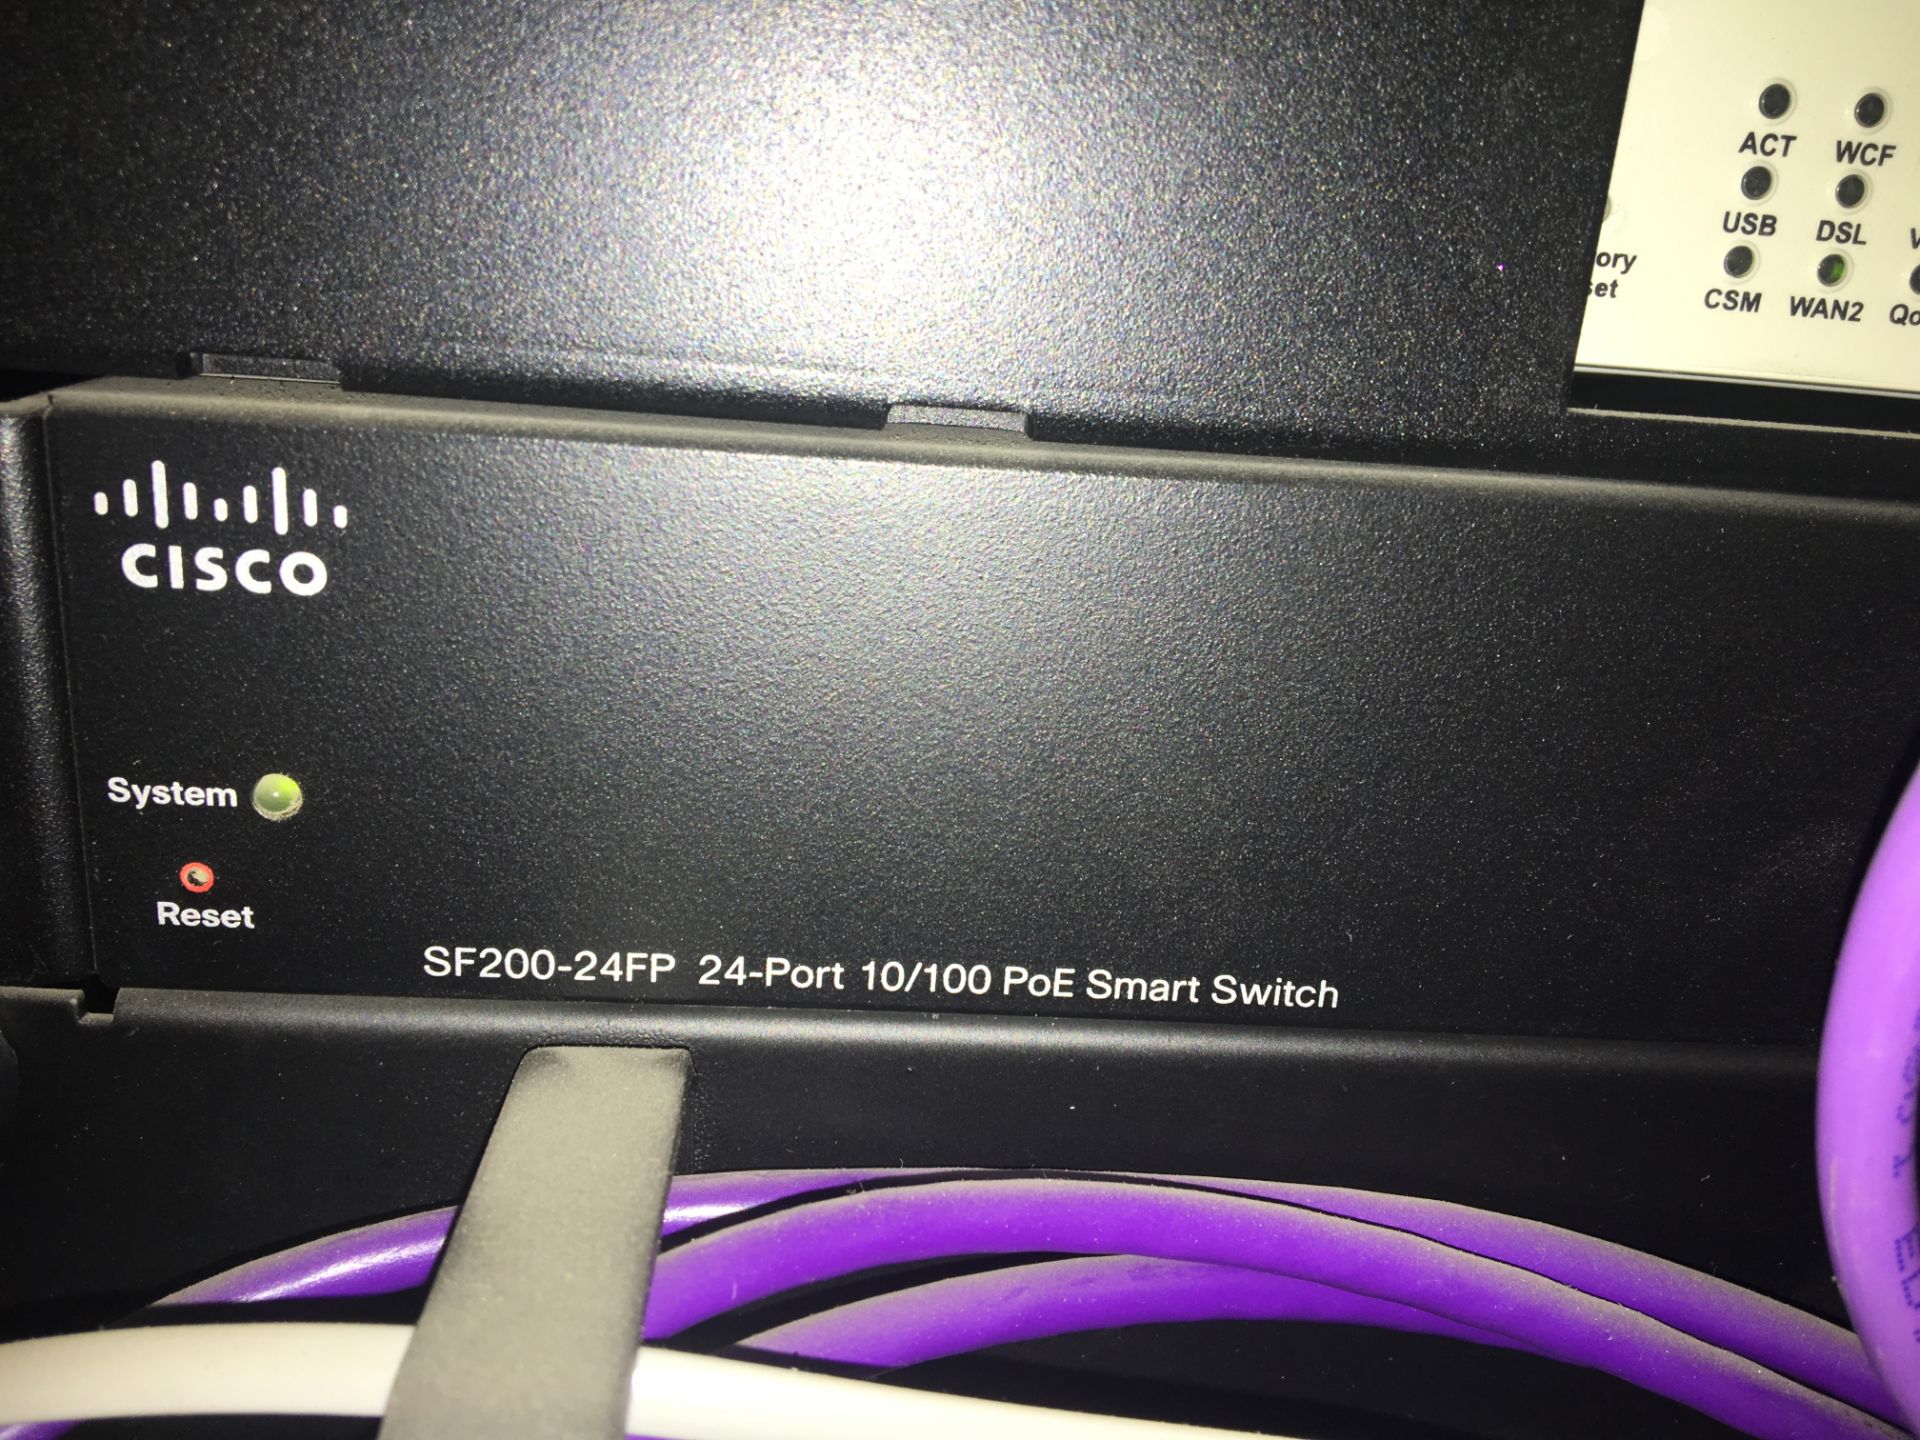 Cisco SF200-24FP rack mounted 24 Port 10 / 100 POE smart switch with Cat 5e rack mounted 24 port - Image 3 of 4